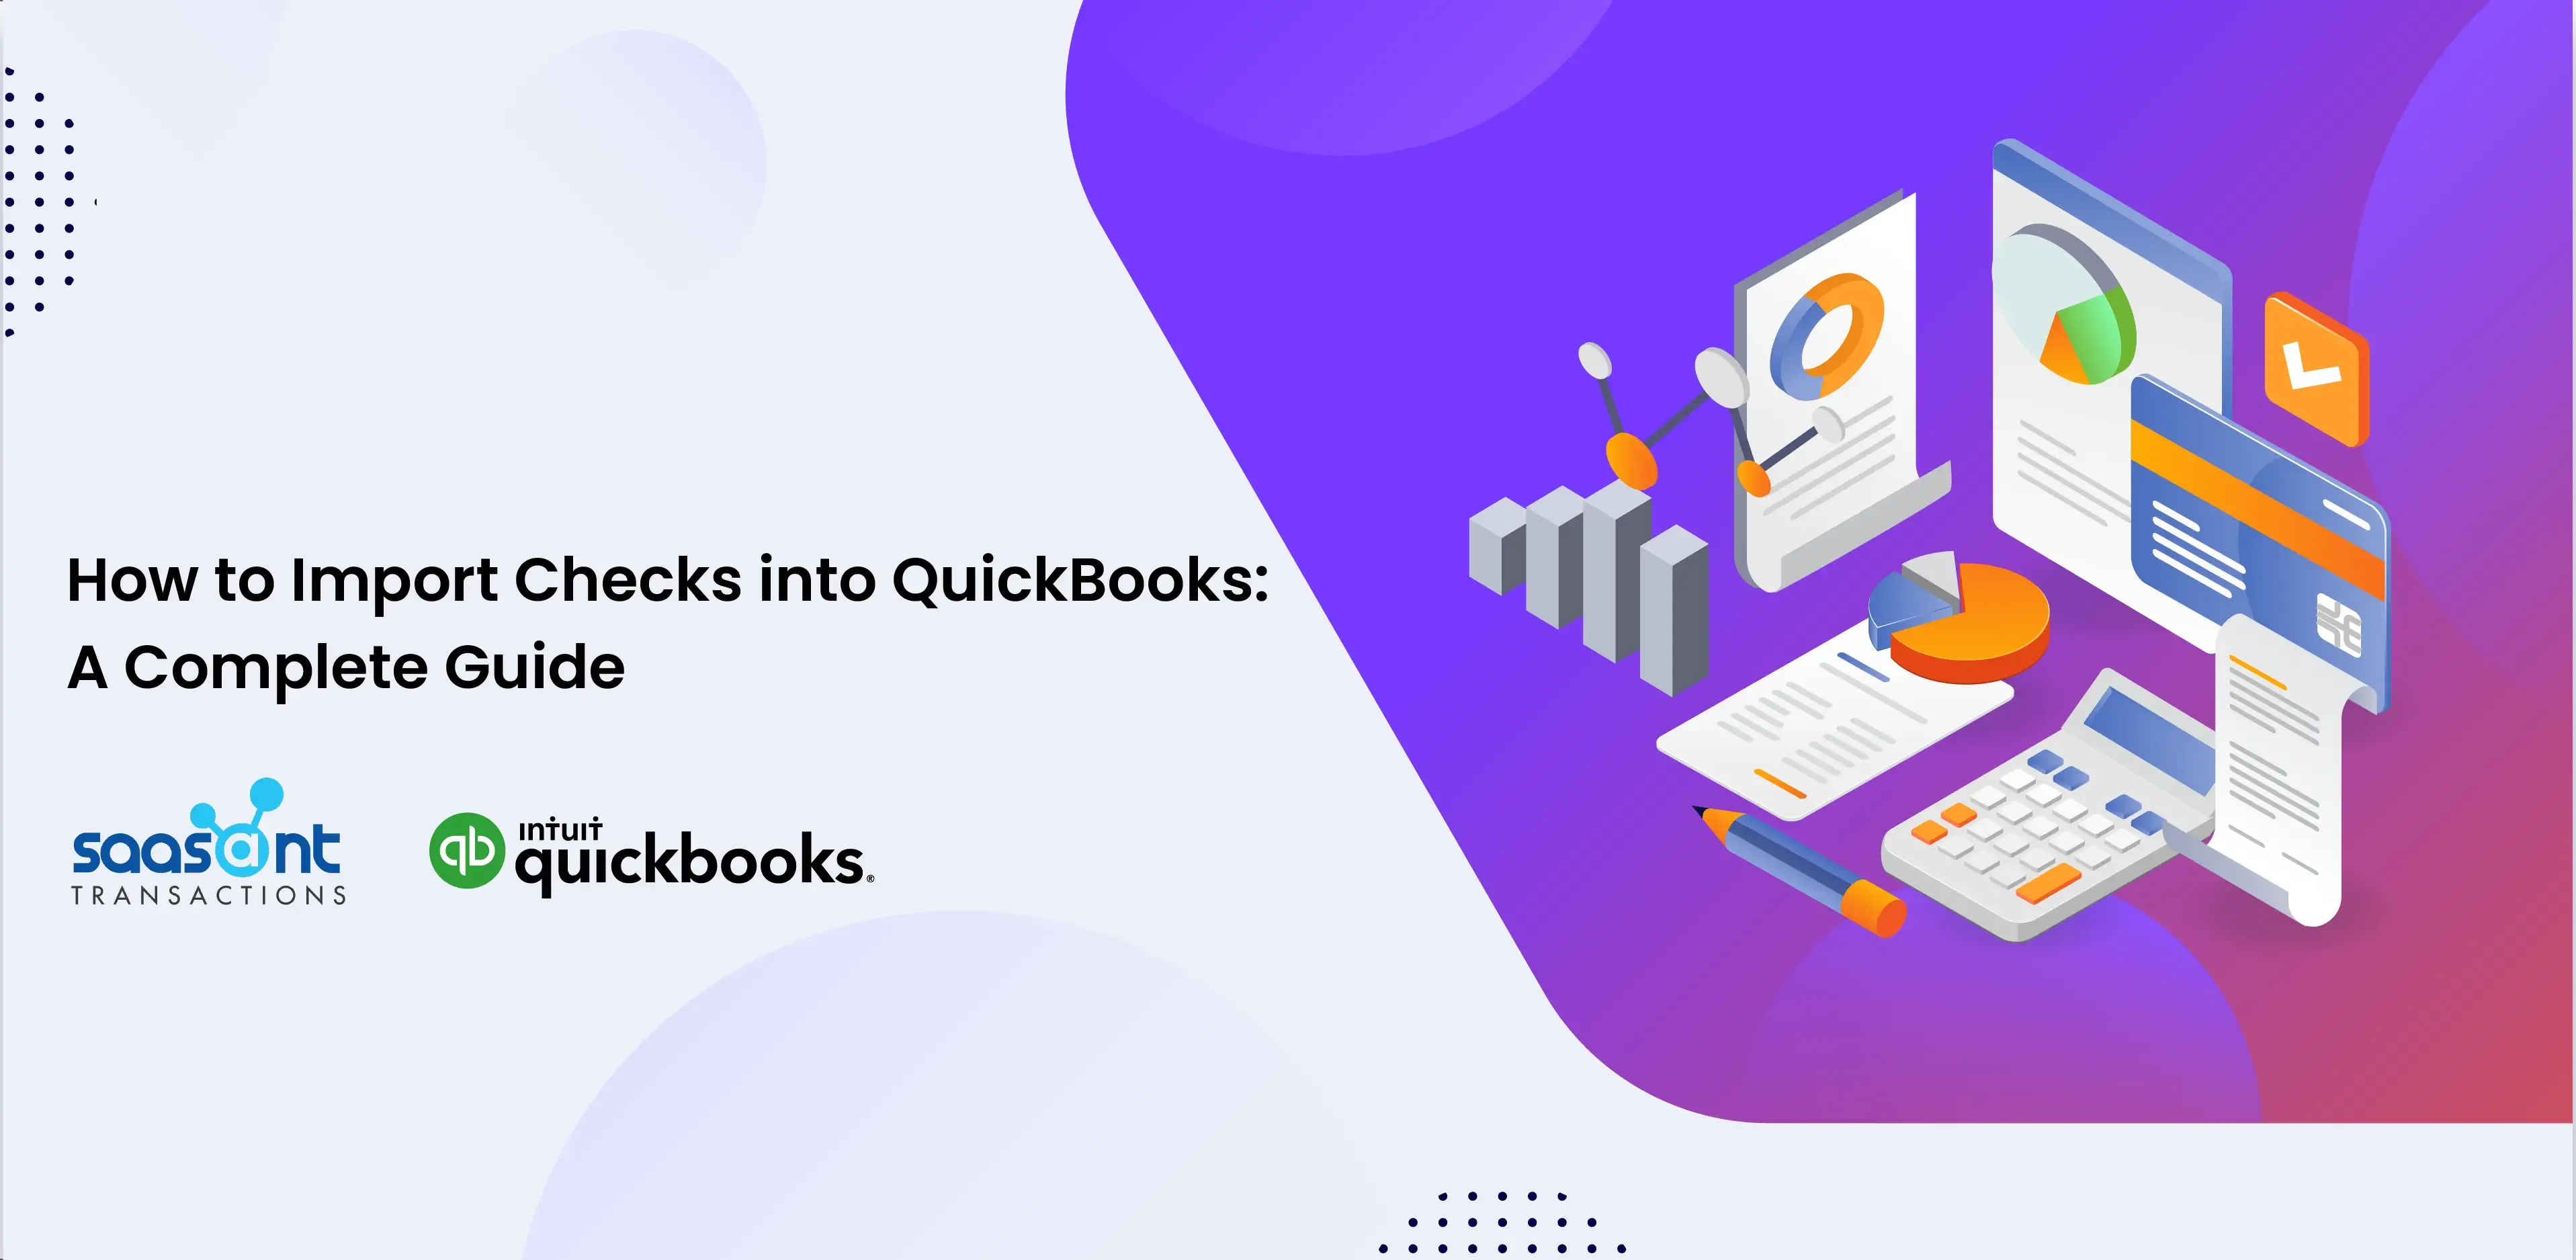 blog_images1703128956225_How-to-Import-Checks-into-QuickBooks-A-Complete-Guide.webp